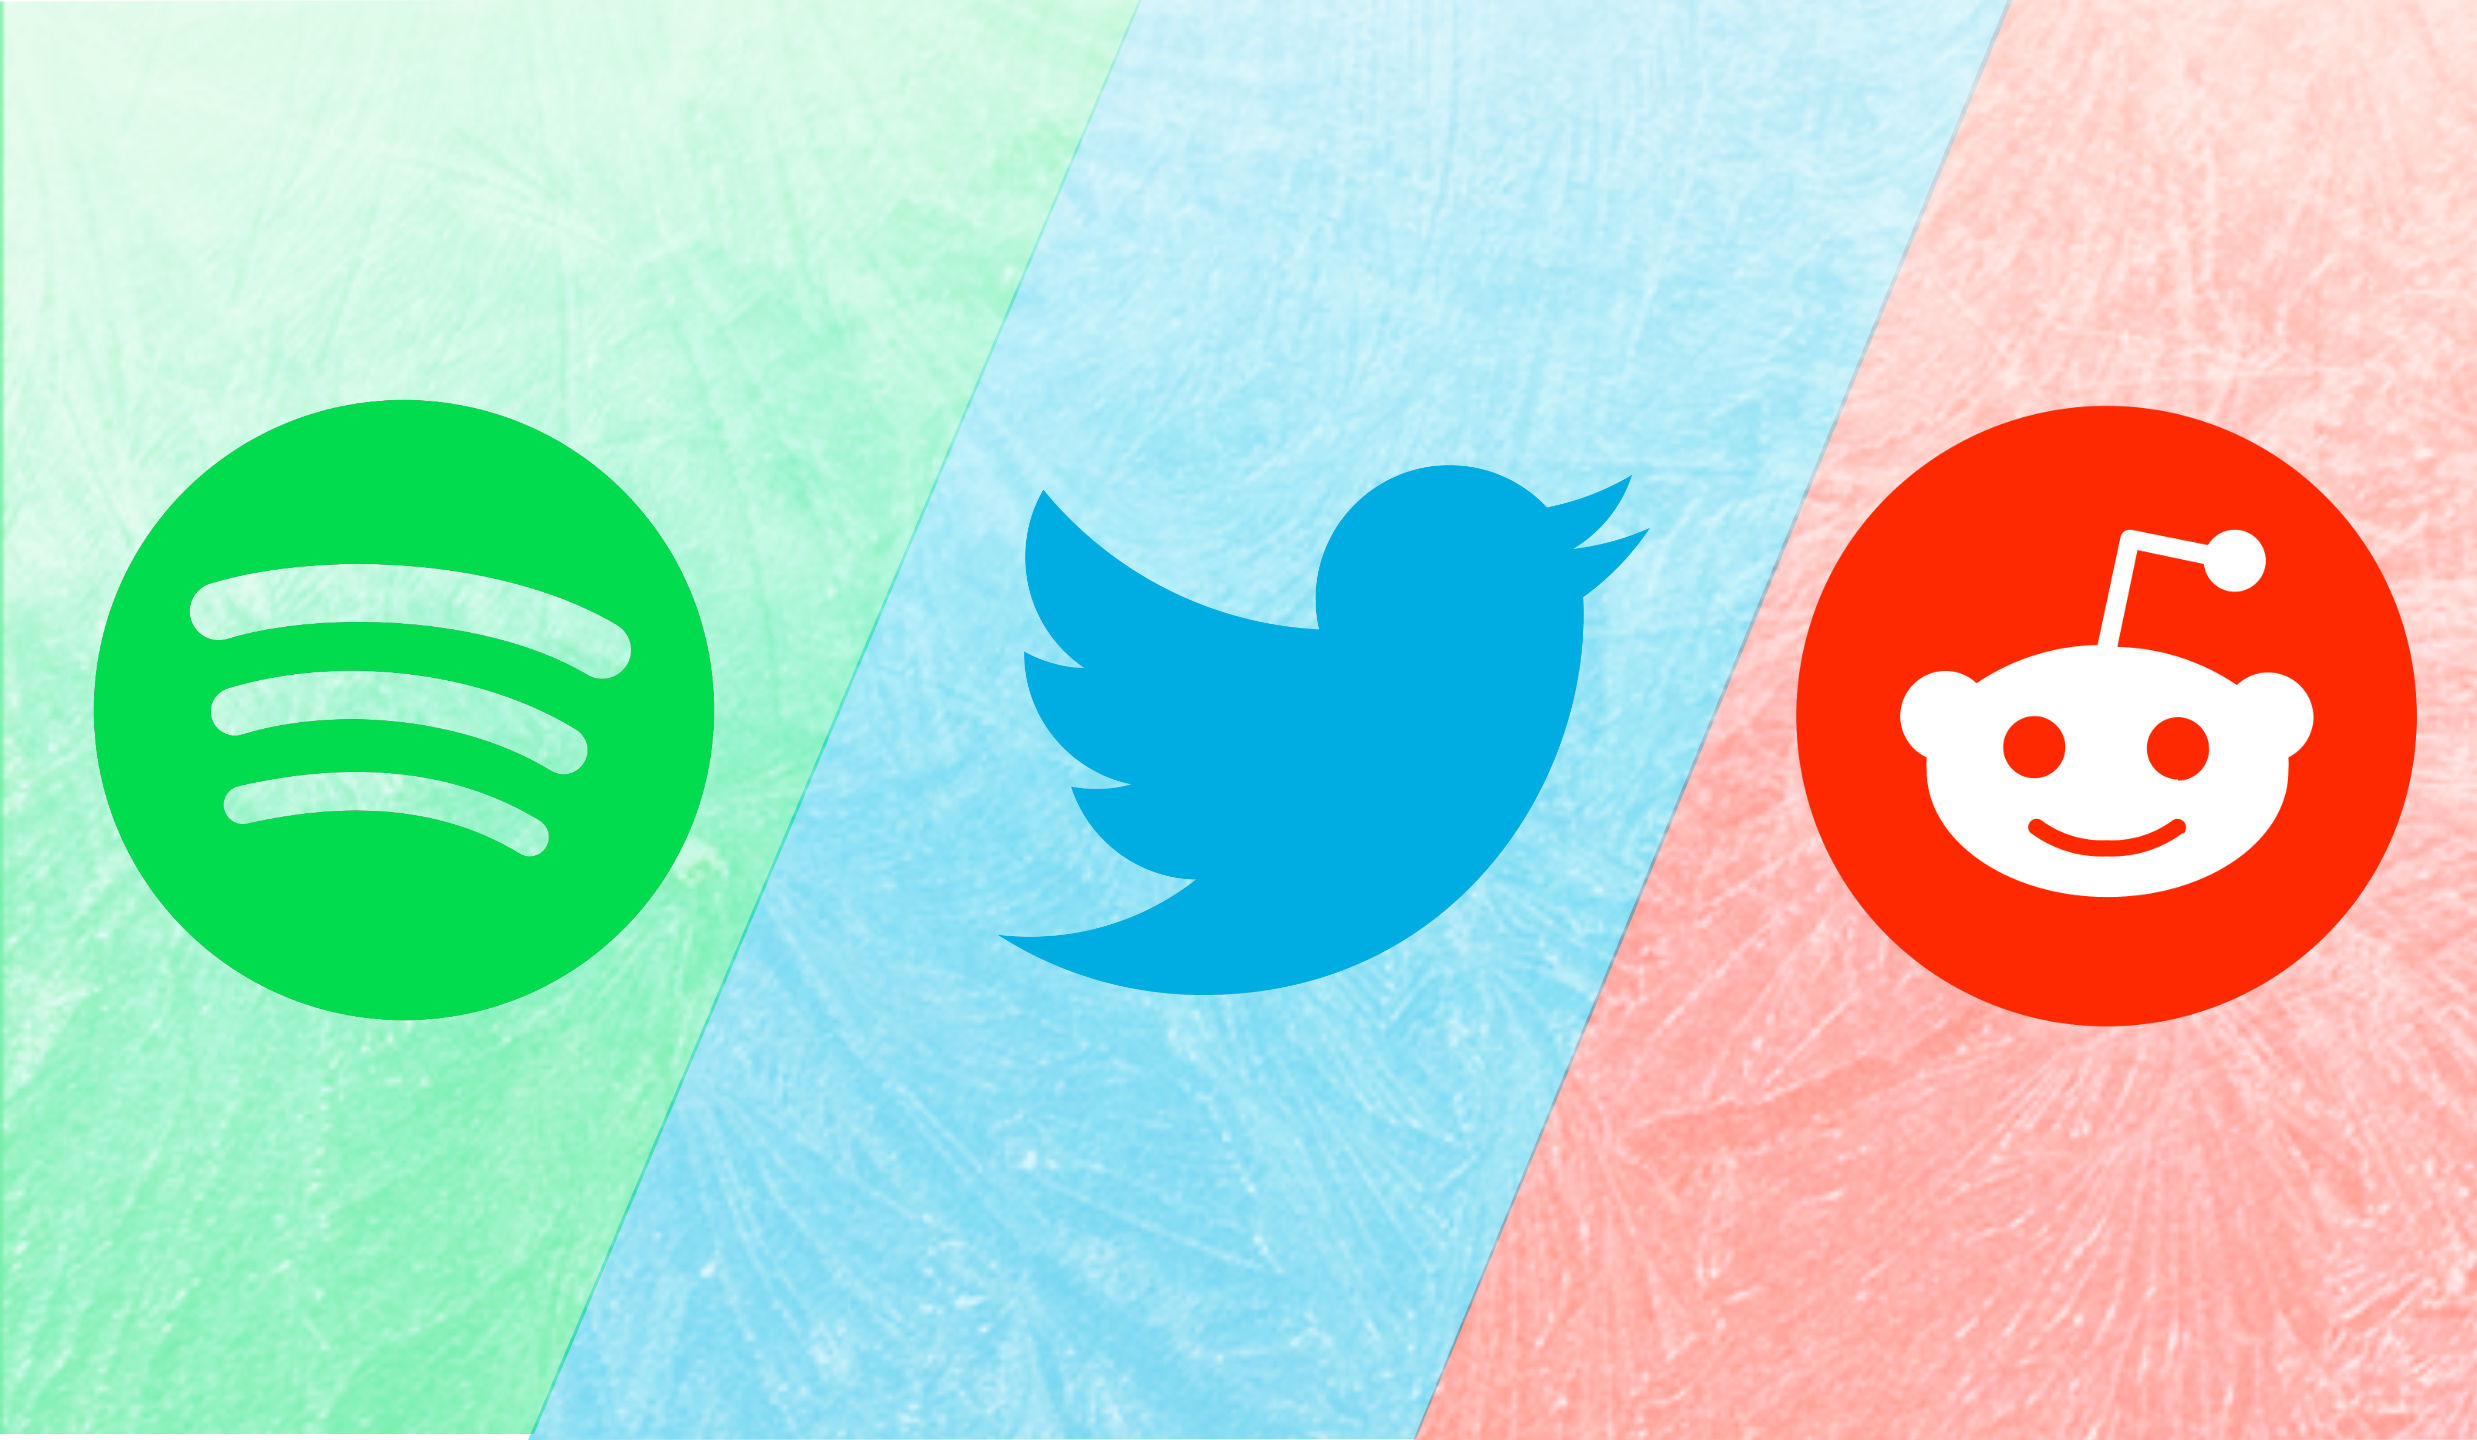 Spotify, Twitter and Reddit Integrations Added!